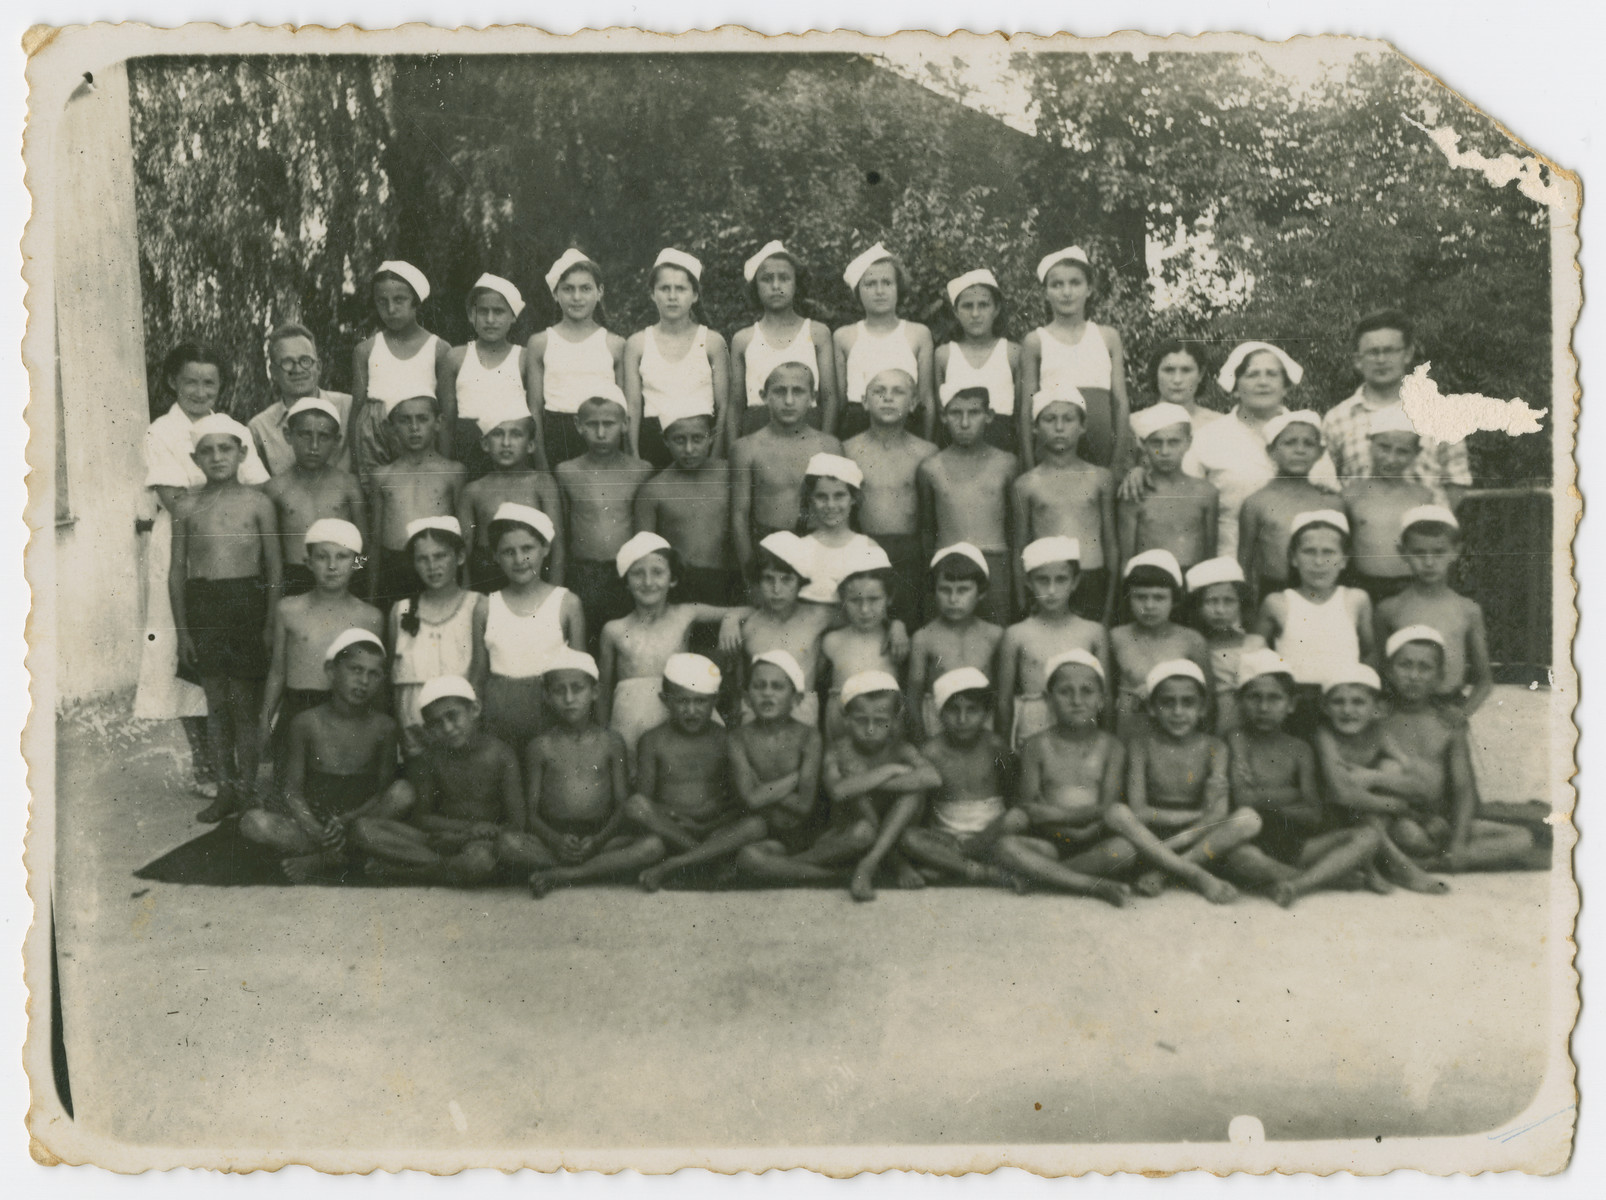 Group portrait of children in a T.O.Z. summer camp in the summer of 1940, 

Bella Preskovsky attended the. summer camp in Bialystok and was treated there as a "celebrity" from Palestine. Many of the children depicted in the photograph were deported from the Bialystok ghetto to Theresienstadt in 1943.